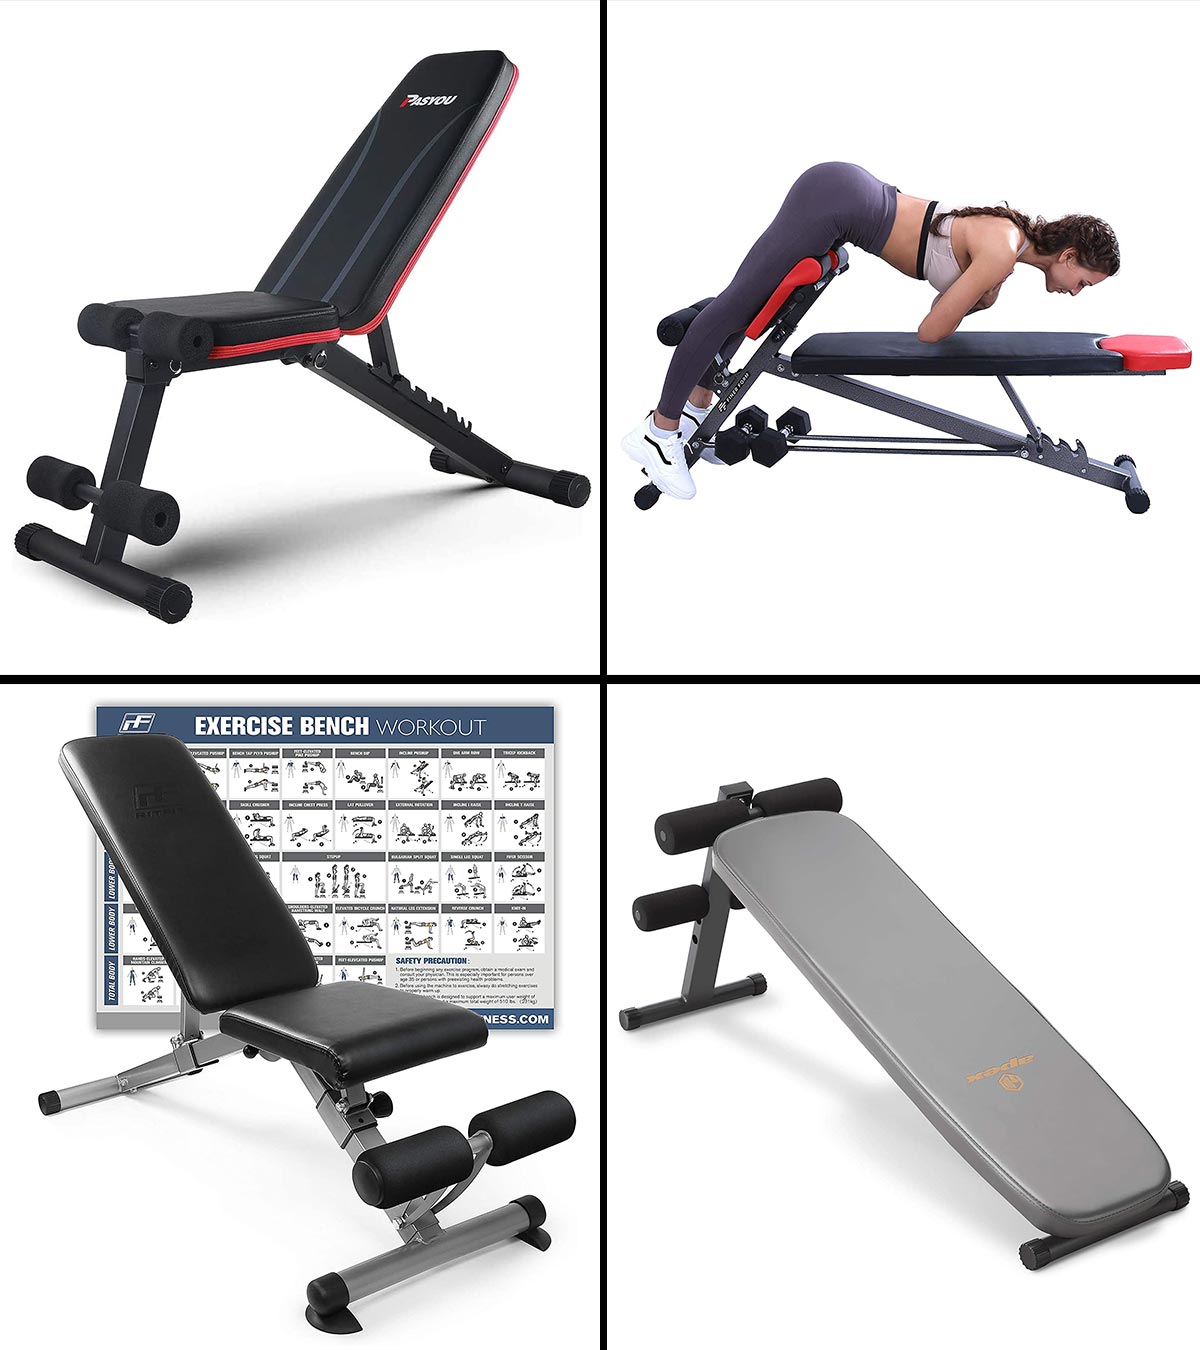  Finer Form Multi-Functional Gym Bench for Full All-in-One Body  Workout – Versatile Fitness Equipment for Hyper Back Extension, Roman  Chair, Adjustable Situp, Decline, Flat Bench : Sports & Outdoors